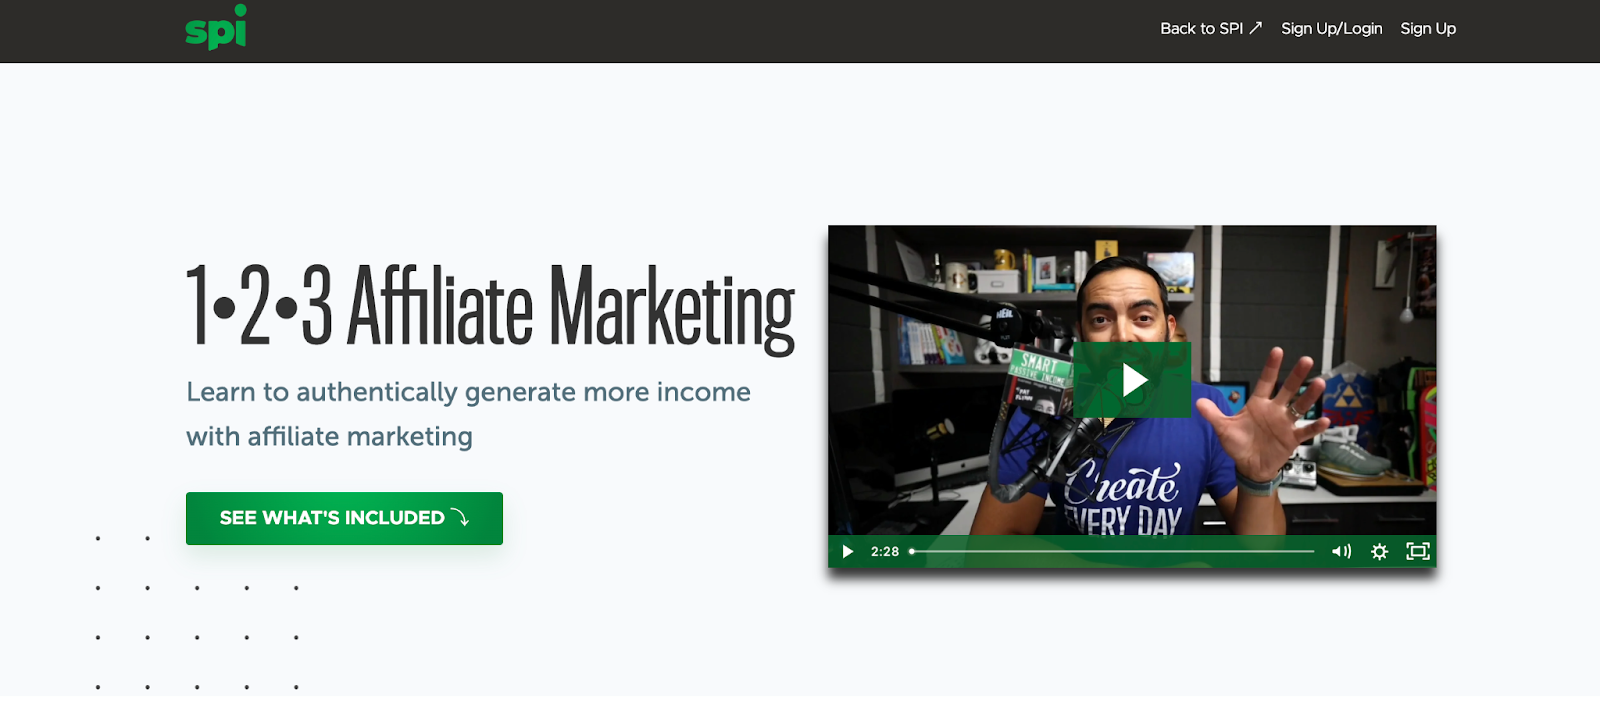 Smart Passive income landing page for affiliate marketing course